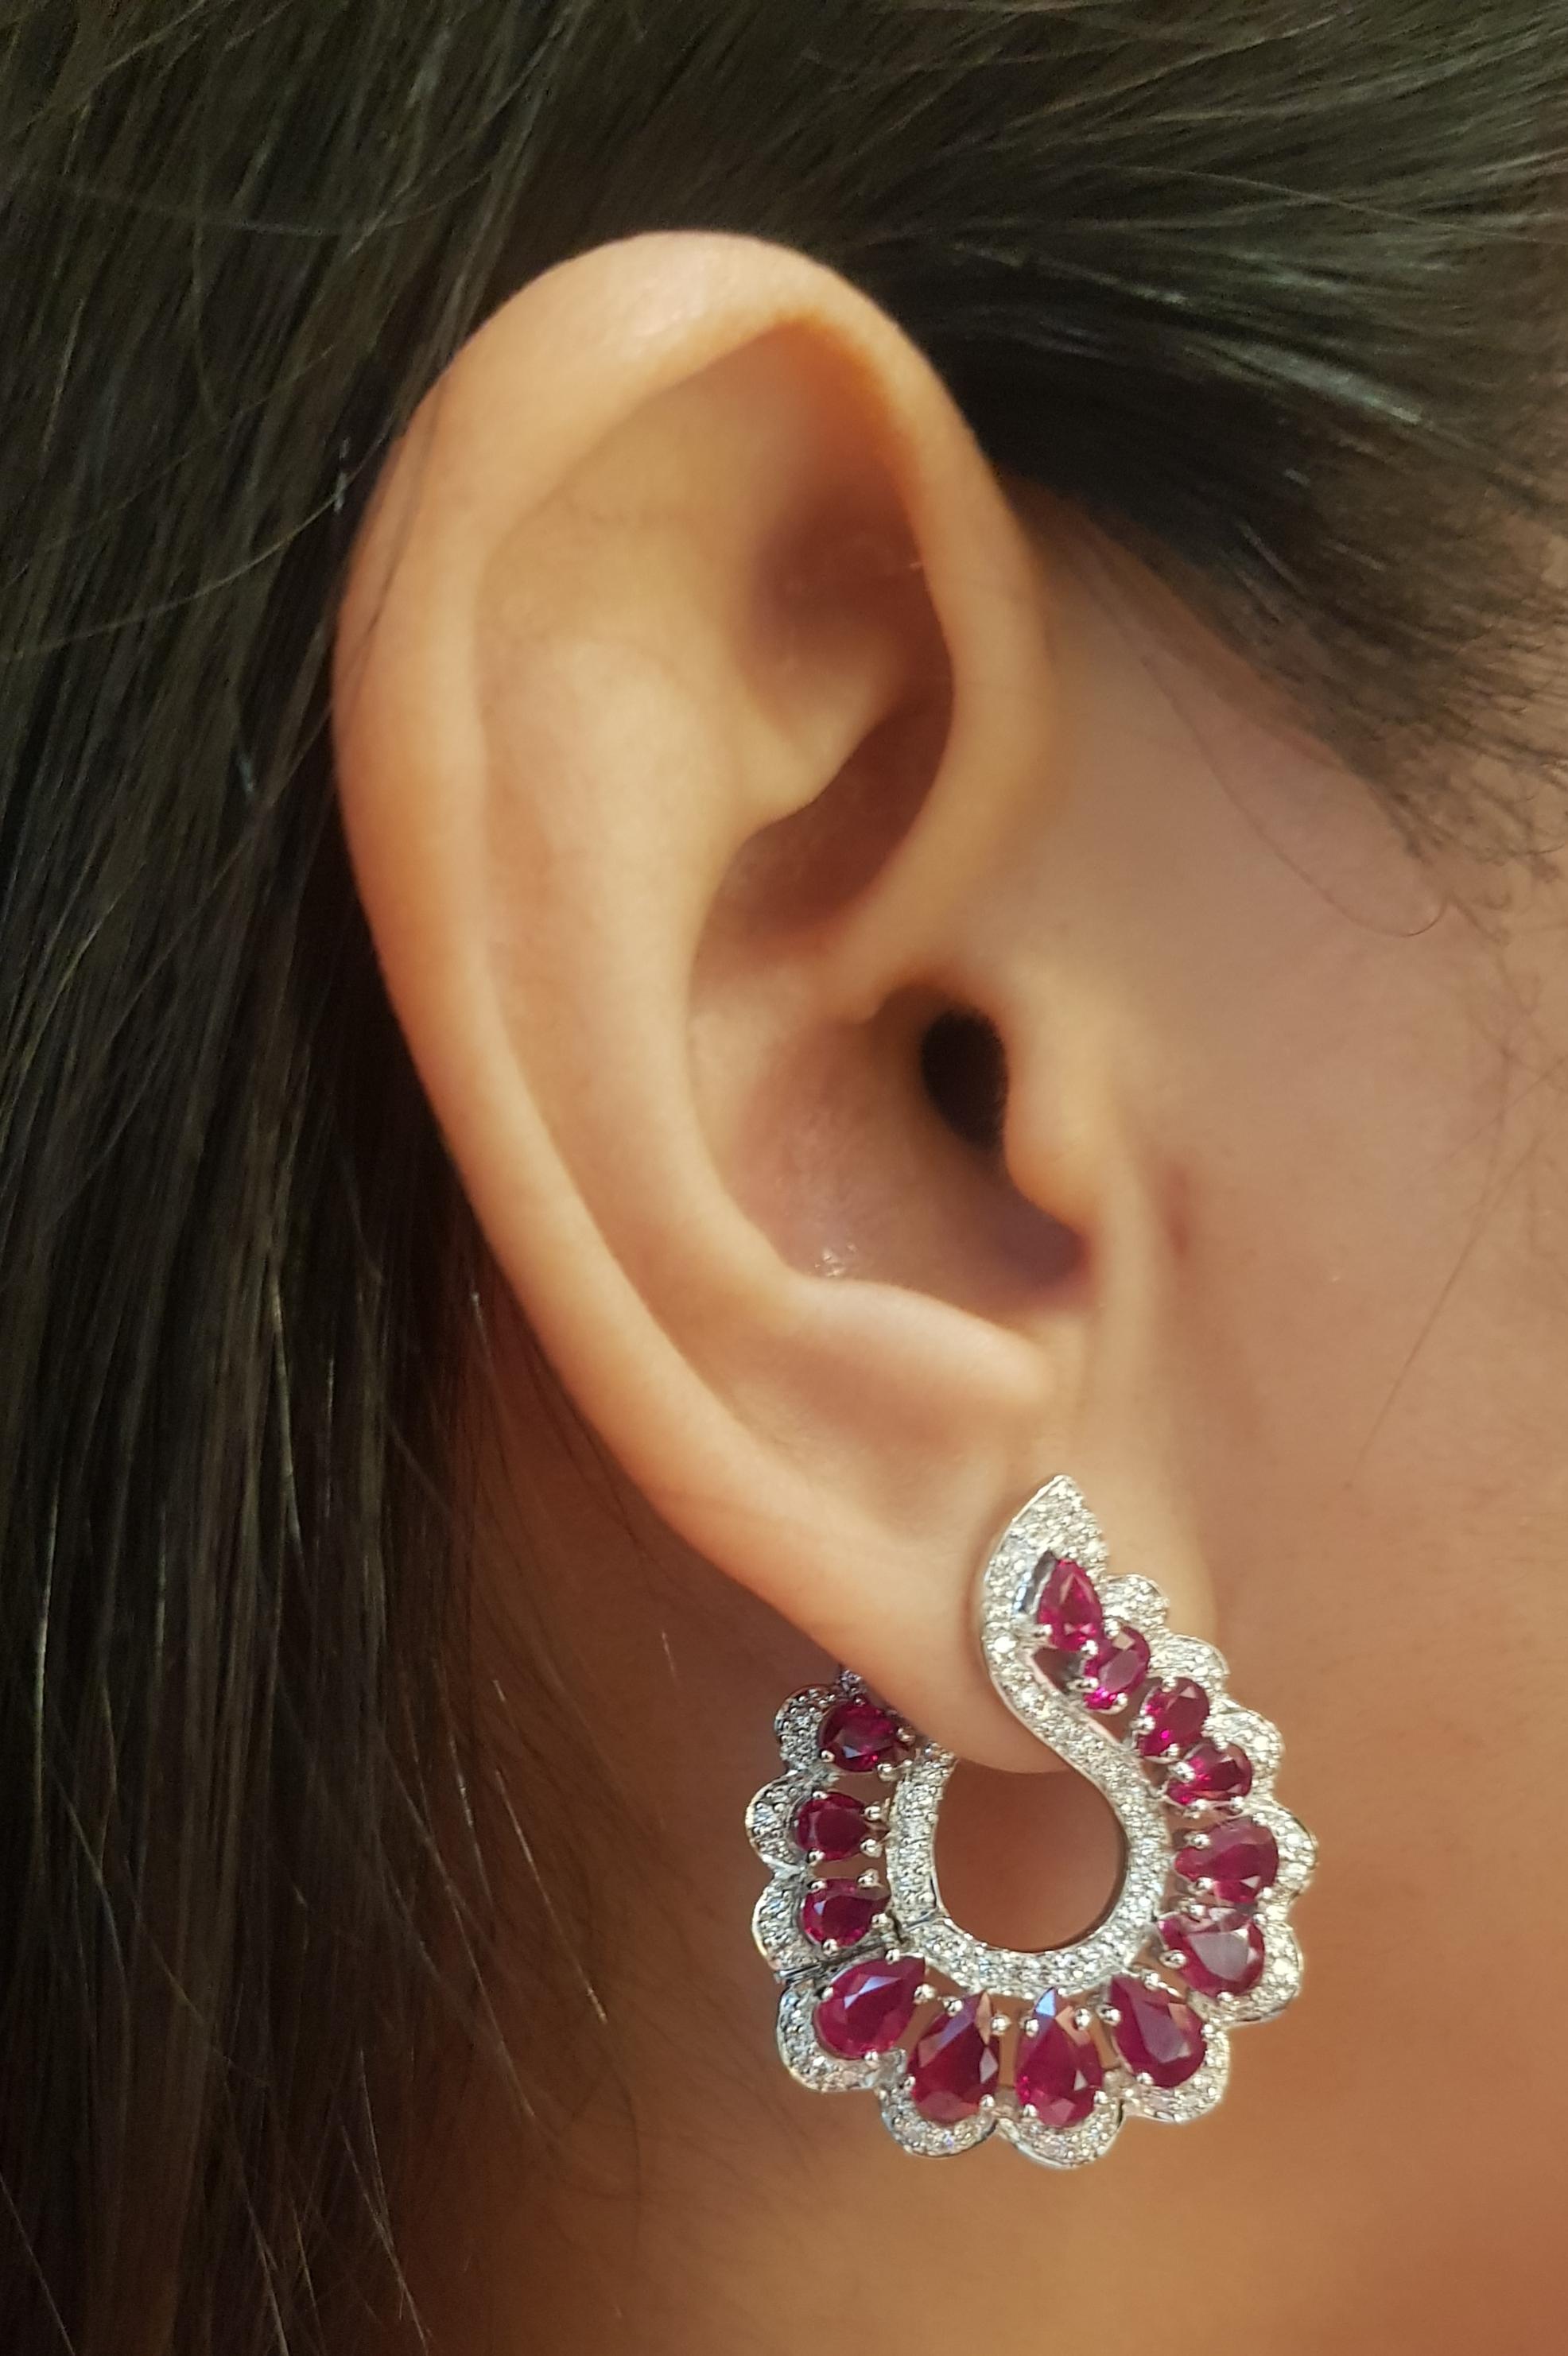 Ruby 6.27 carats with Diamond 1.09 carats Earrings set in 18K White Gold Settings

Width: 2.5 cm 
Length: 3.0 cm
Total Weight: 15.64 grams

